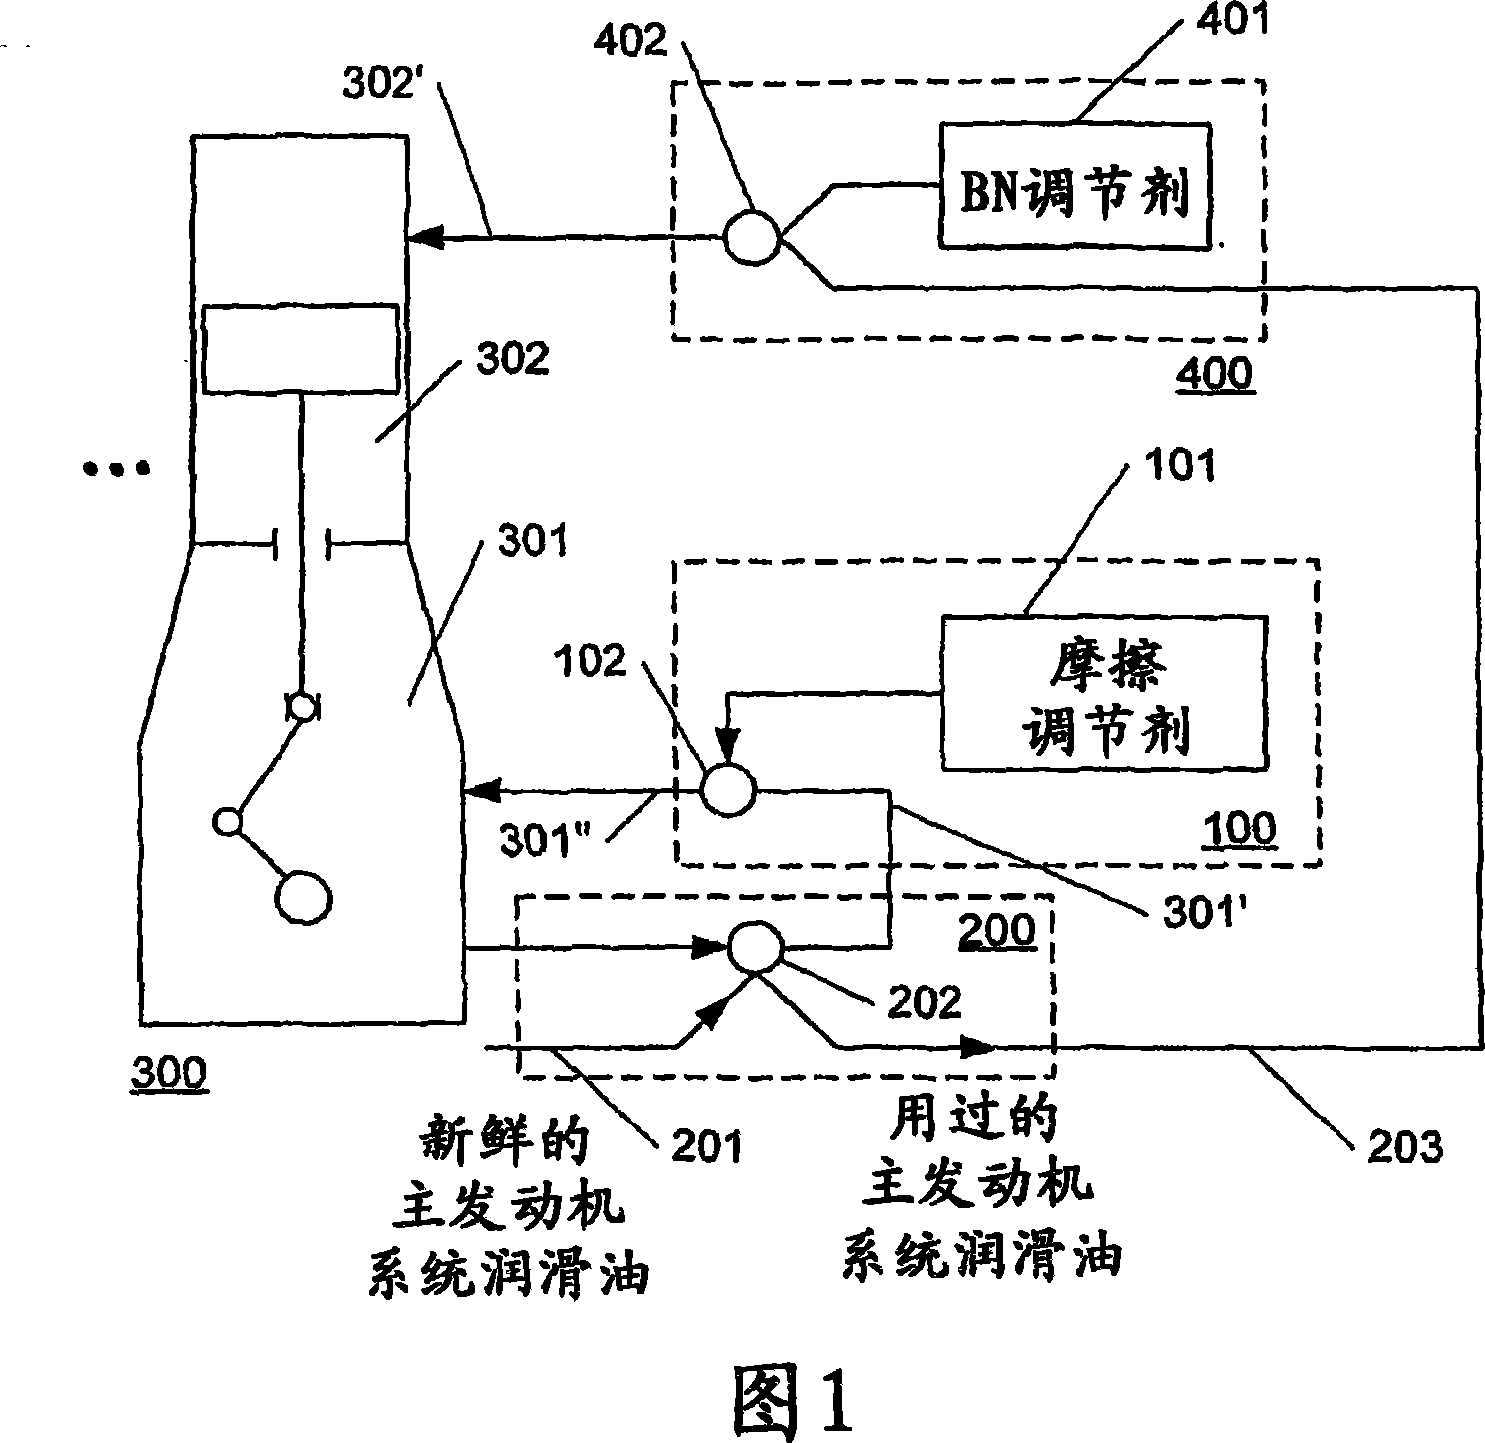 Method and system for improving fuel economy and environmental impact operating a 2-stroke engine